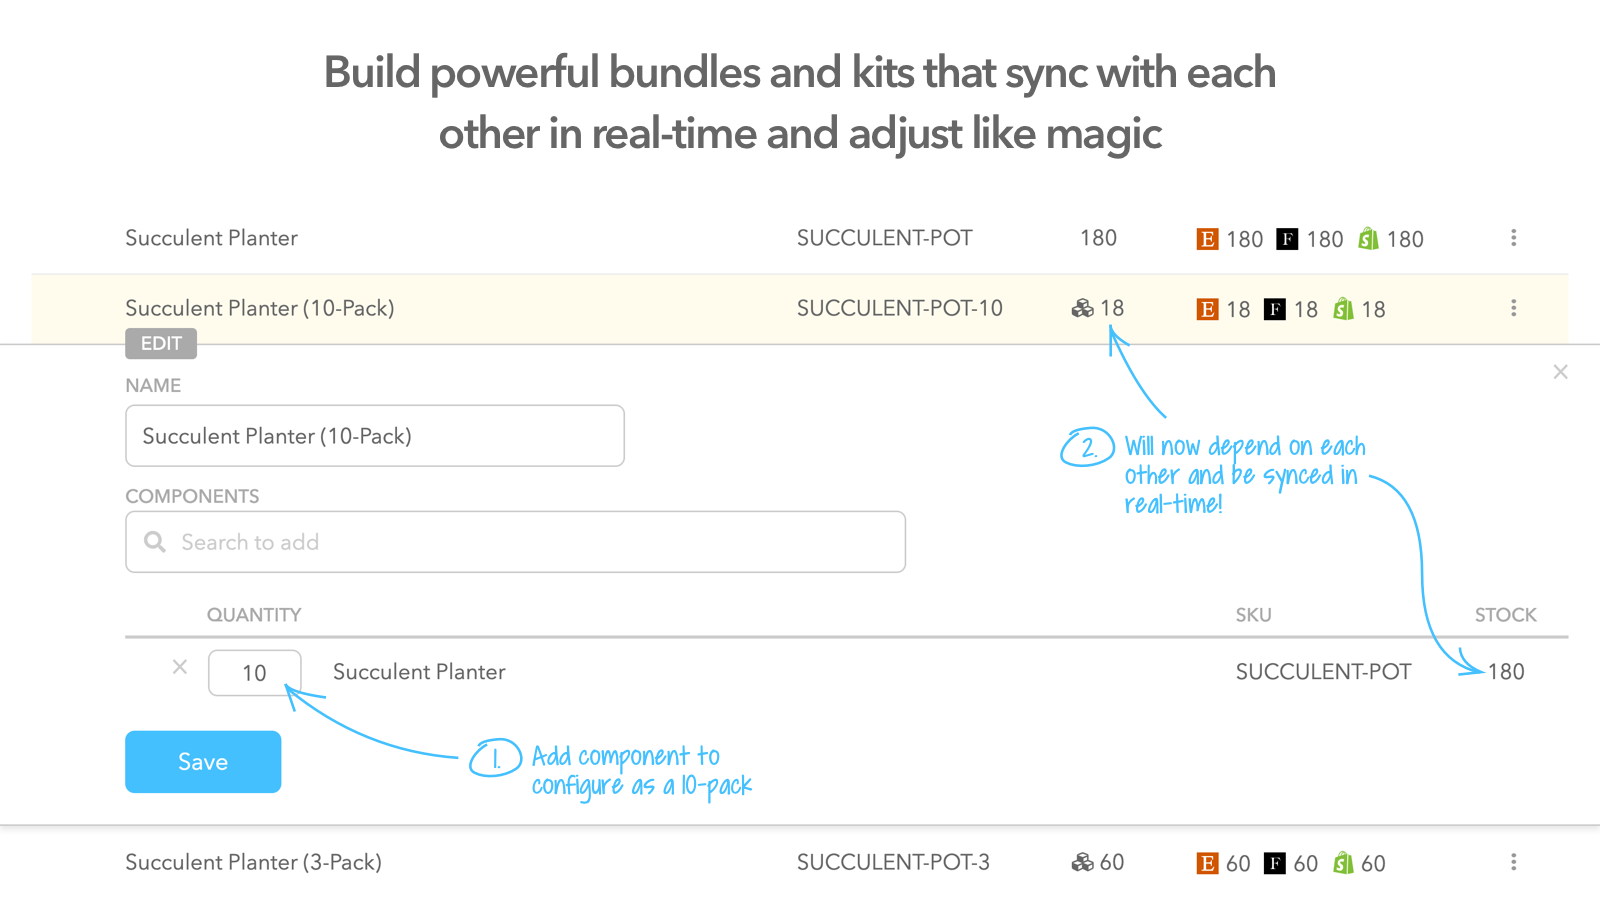 Build powerful bundles and kits that sync with each other